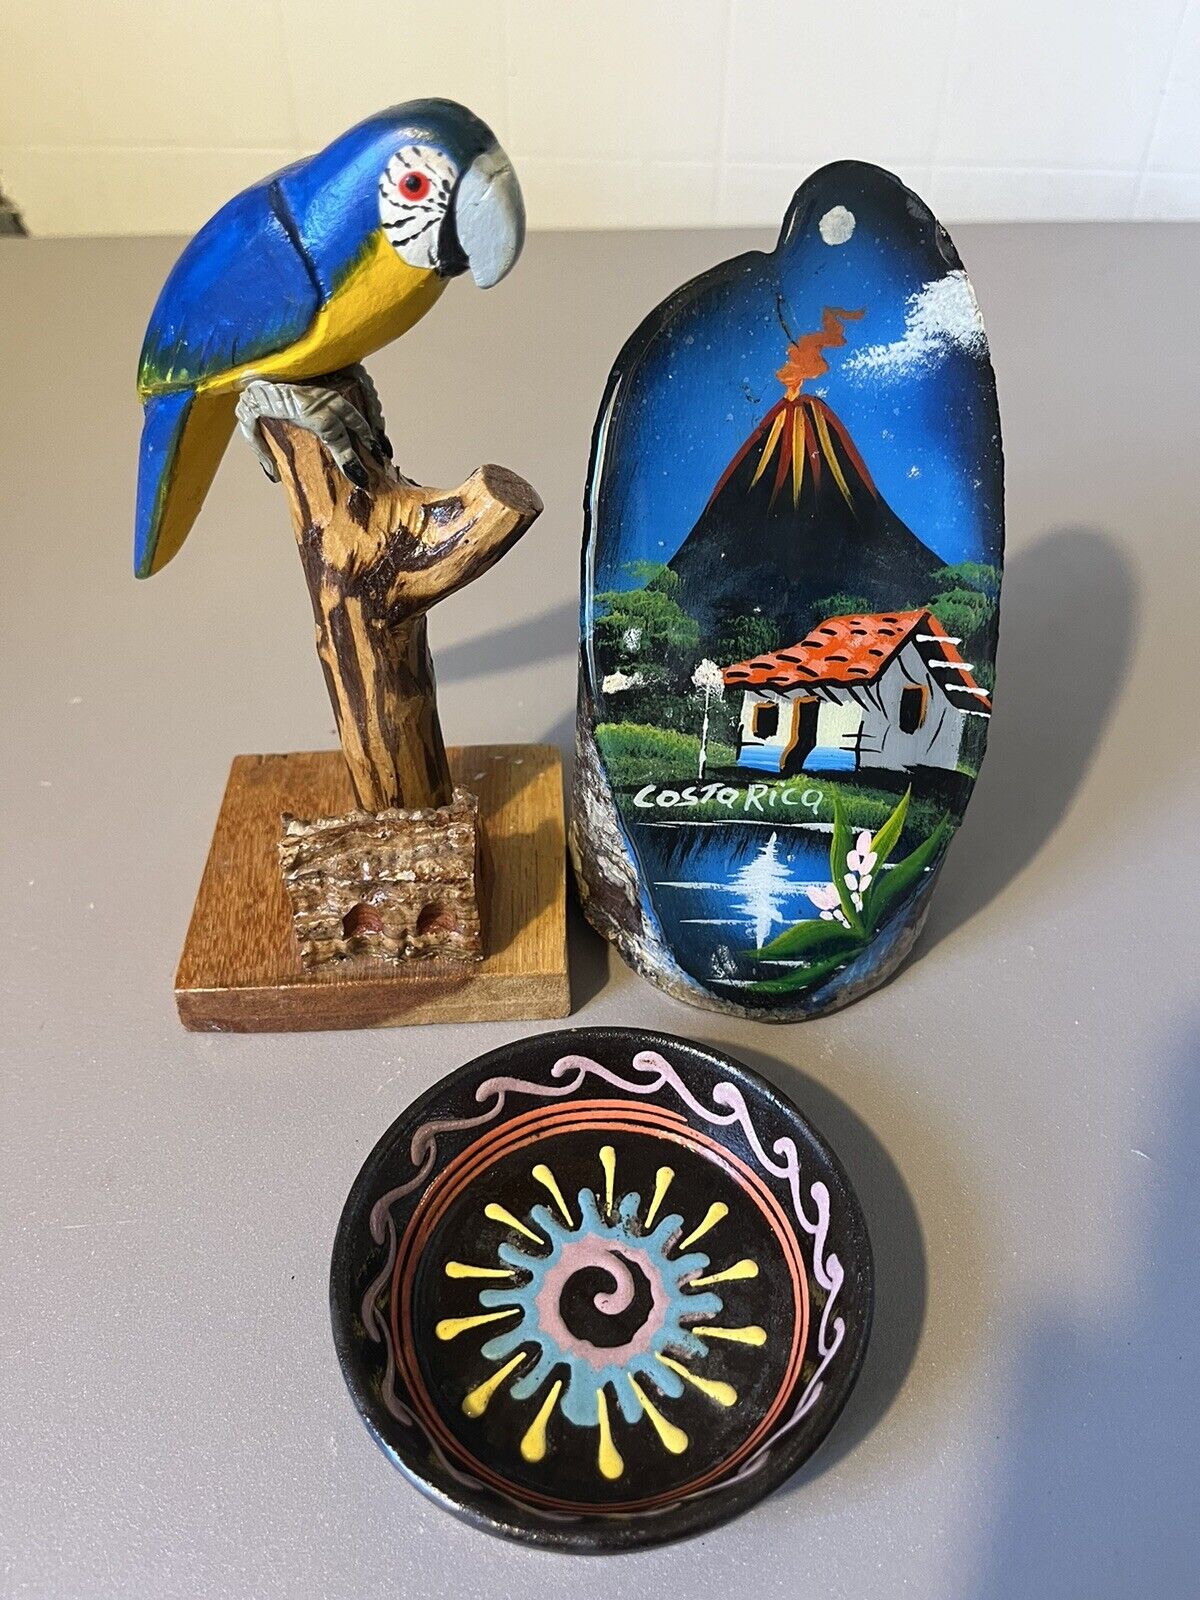 Hand Crafted Costa Rica Souvenir Lot Wooden Parrot Tree Painting